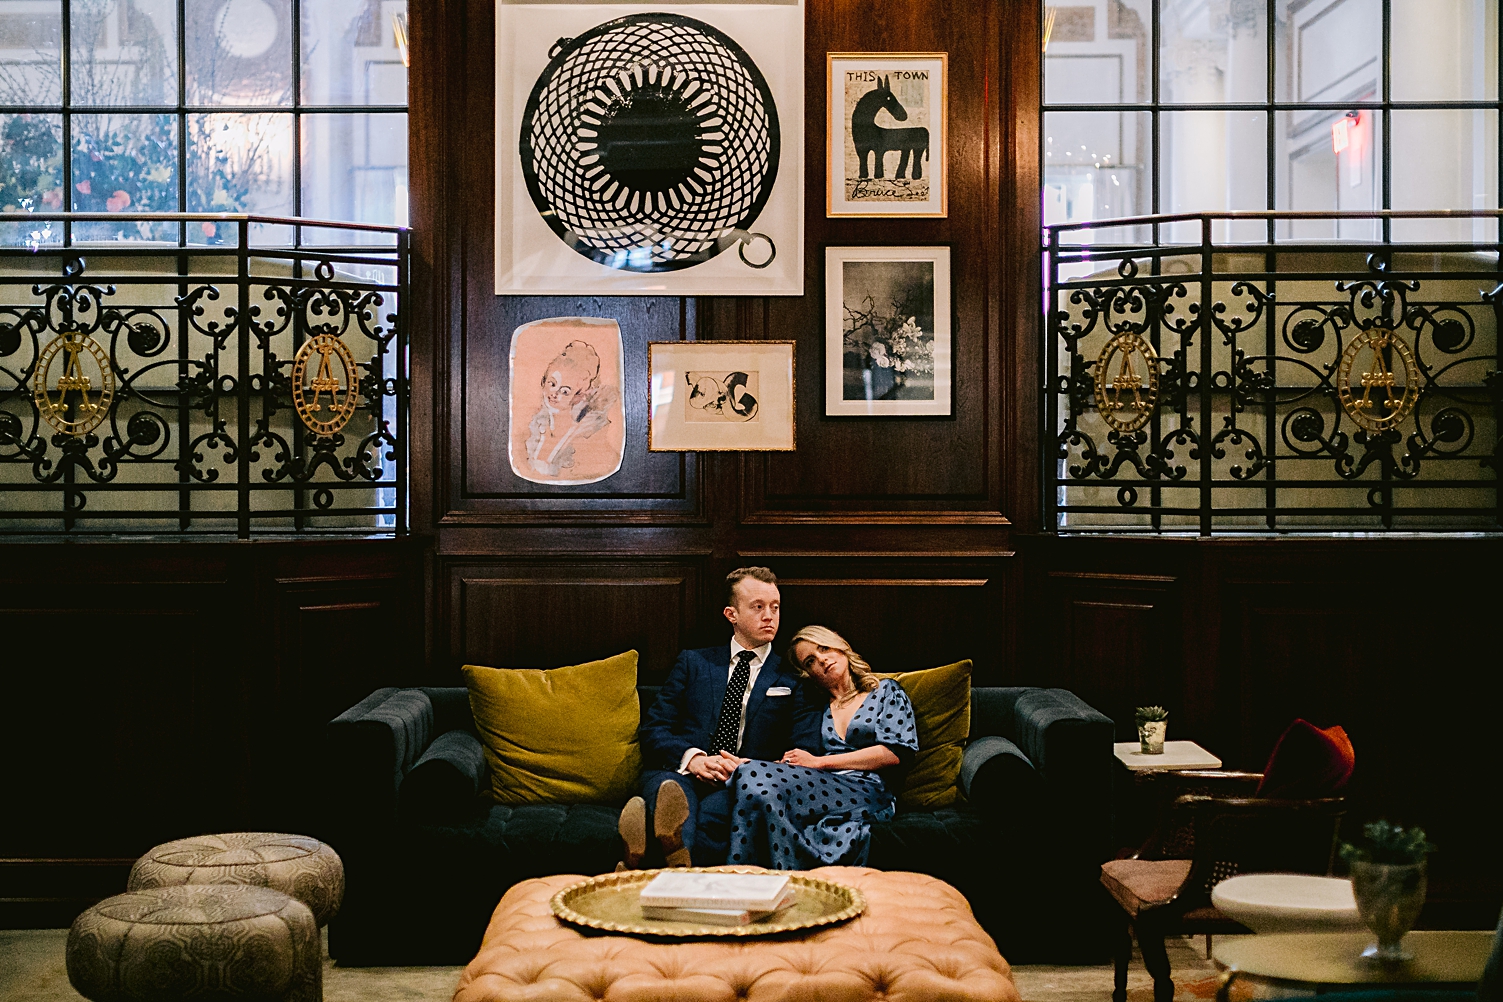 couple sitting in the adolphus hotel under art